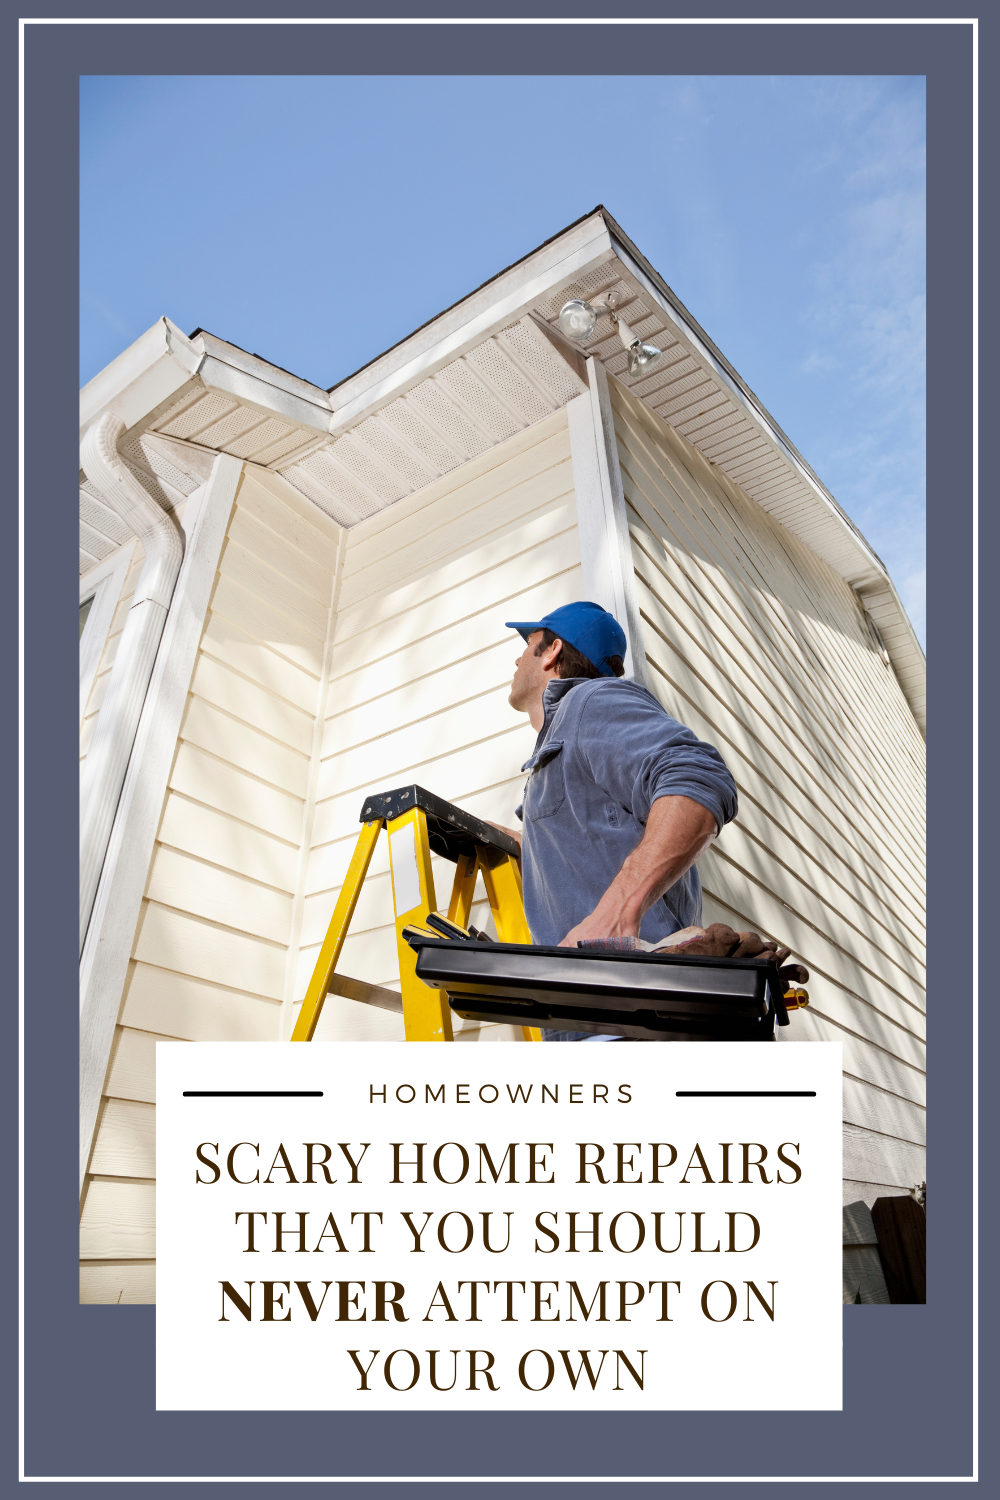 There are a lot of home repairs that you can do yourself if you have some knowledge and experience in the area. However, several repairs are best left to the professionals. Trying to do these repairs on your own can often lead to more problems and could even be dangerous. So here are some home repairs that you should never attempt yourself.